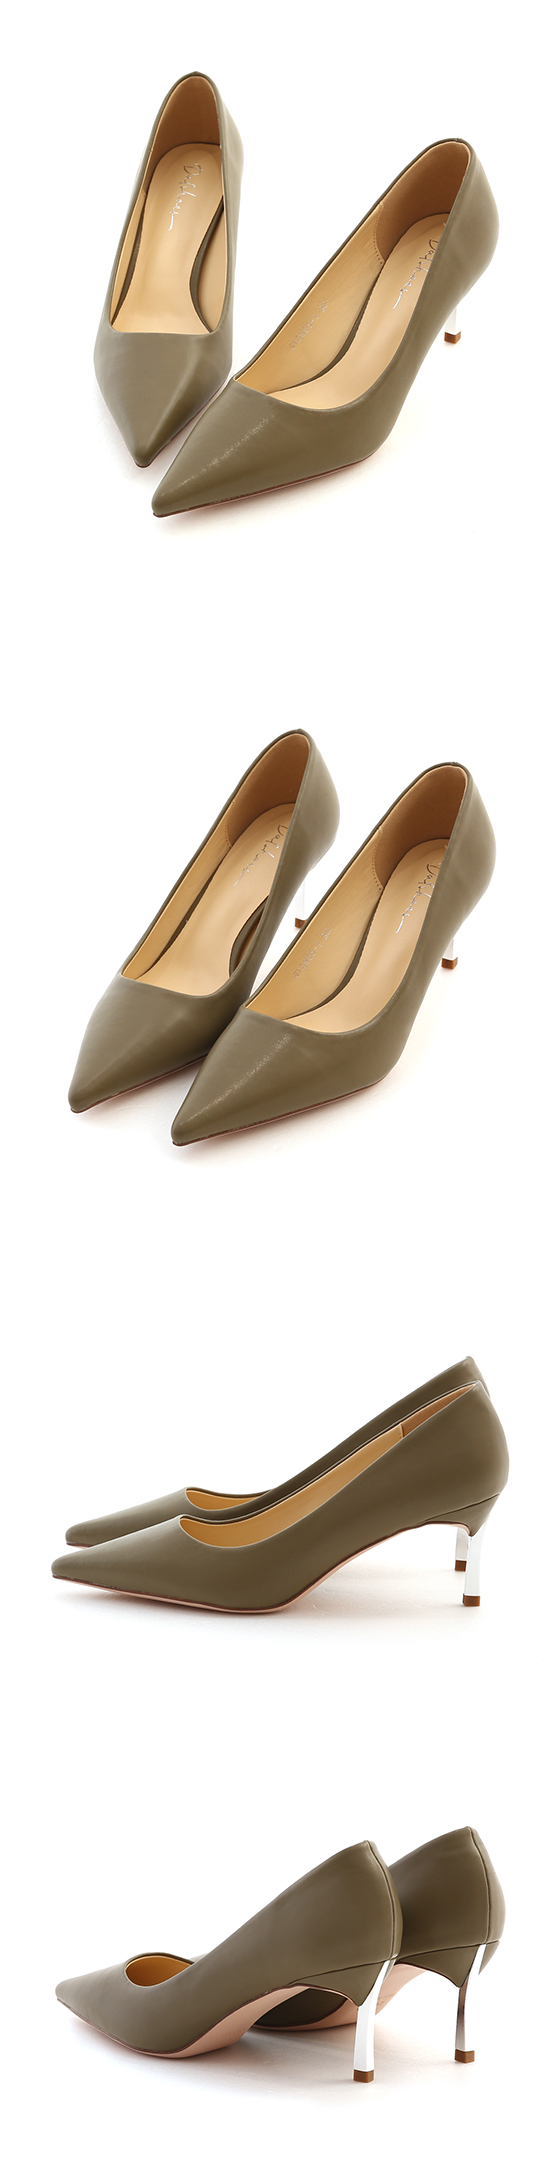 Plain Pointed Toe 6cm High-Heels Olive Green